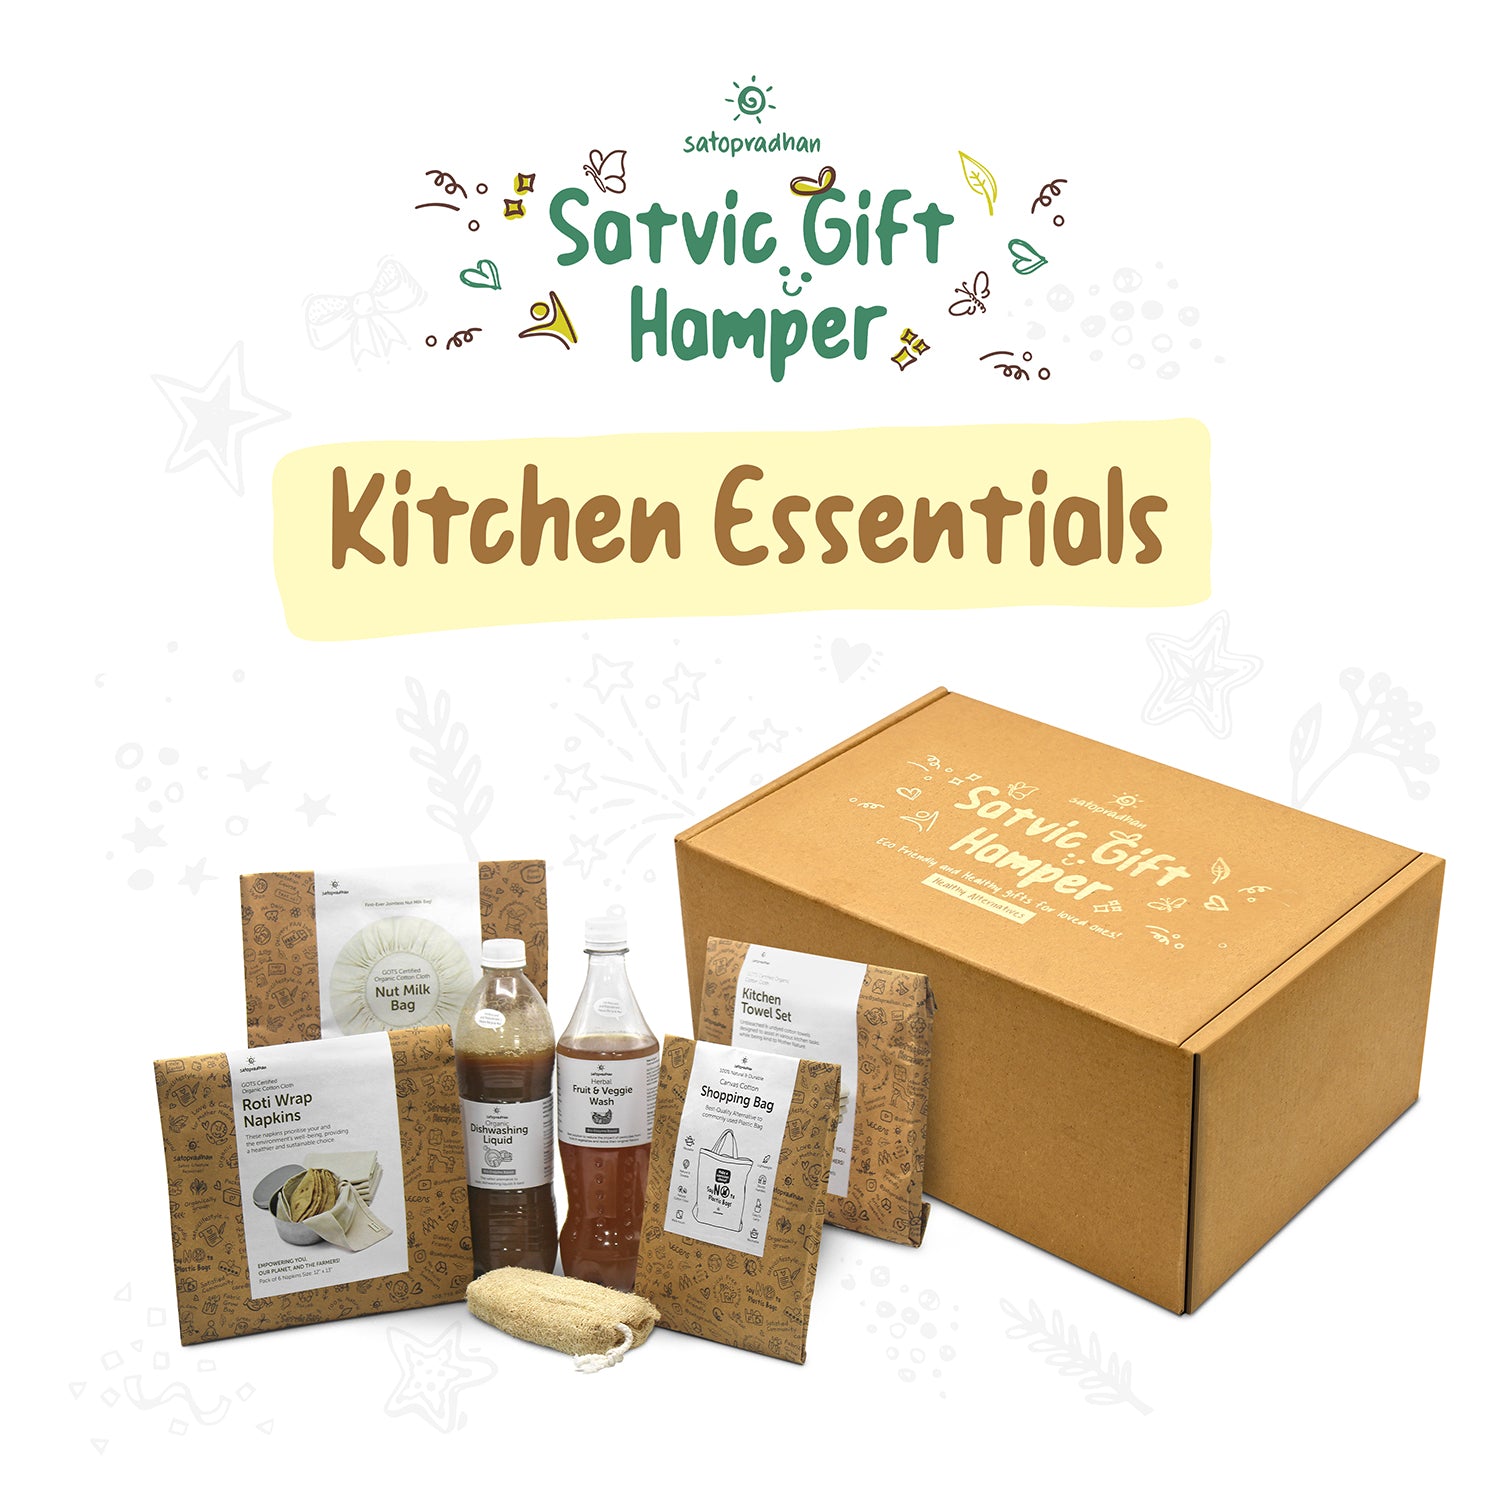 Satvic Kitchen Essentials Gift Hamper - Eco-Conscious Gift pack for Sustainable Living